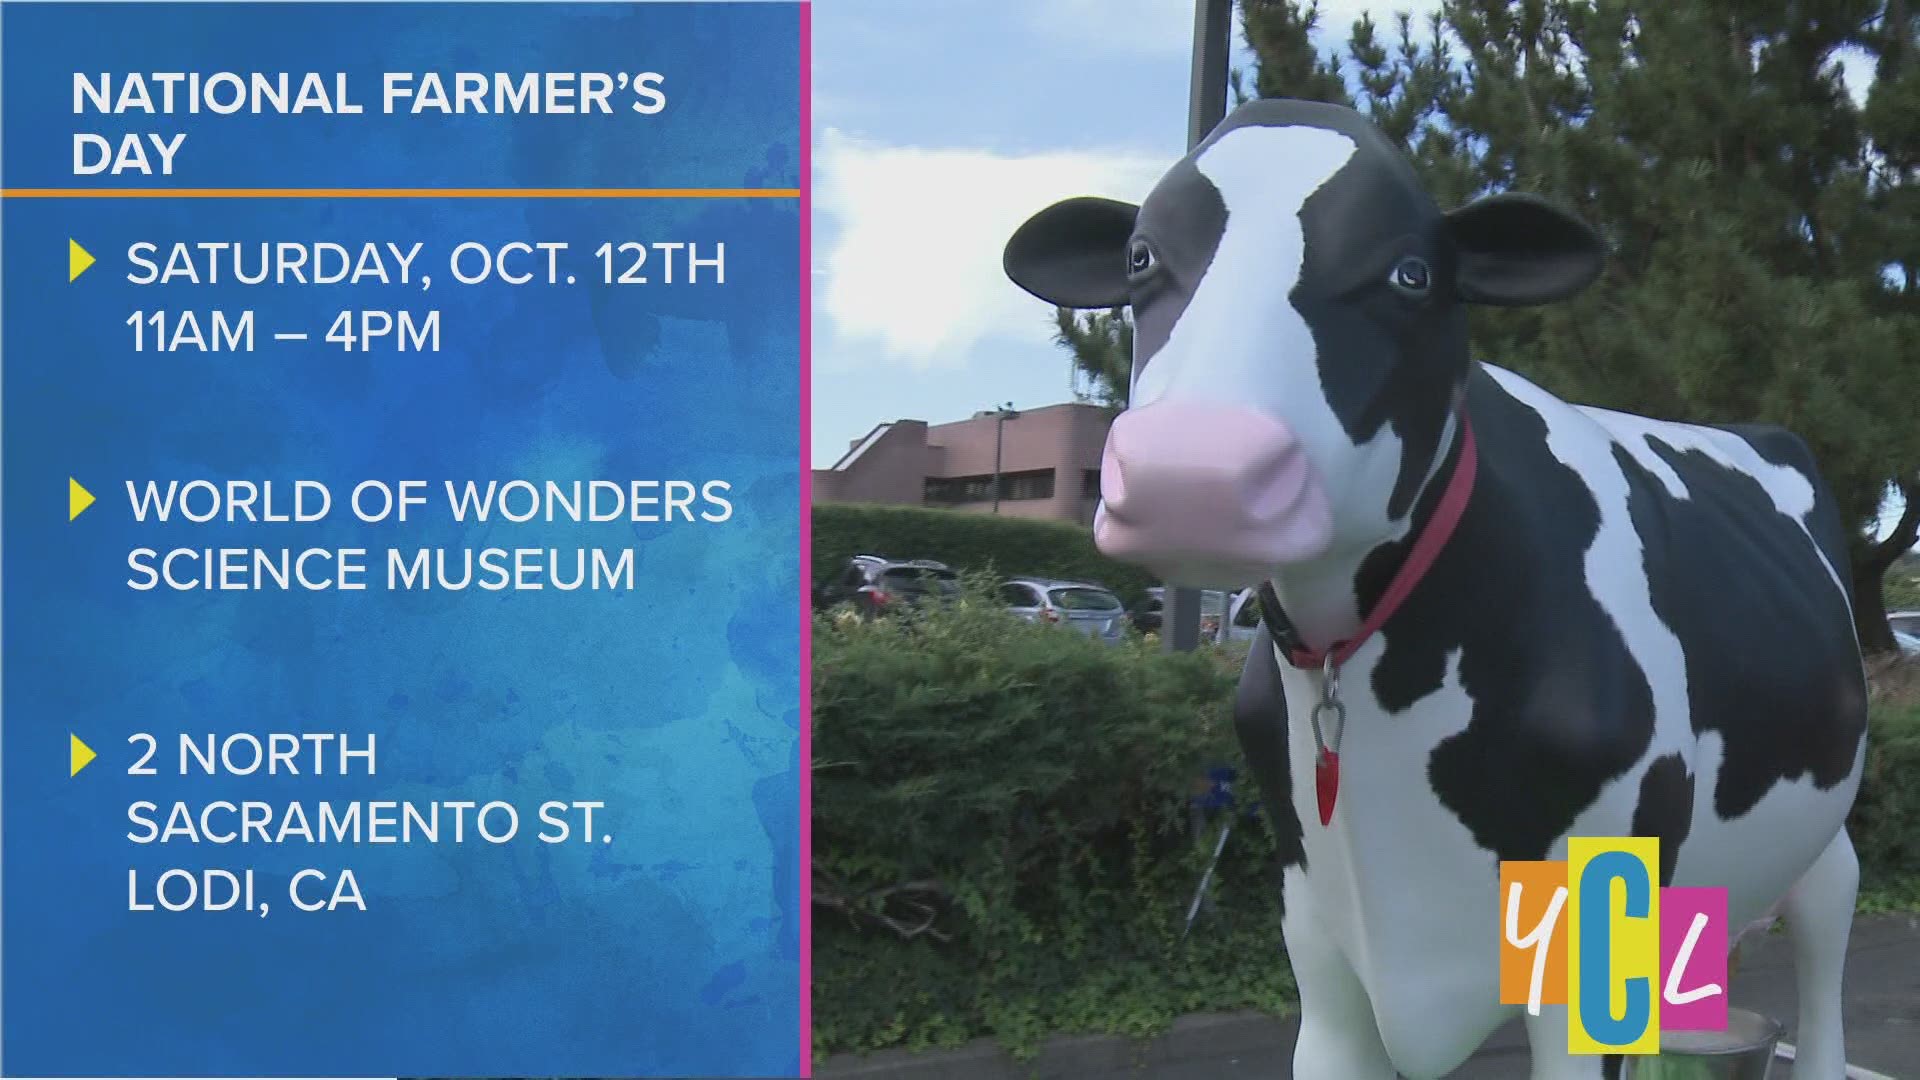 Free day at the museum is coming up for ‘National Farmer’s Day’ event where you can milk a cow, see animals, giant tractors, stomp grapes and more.